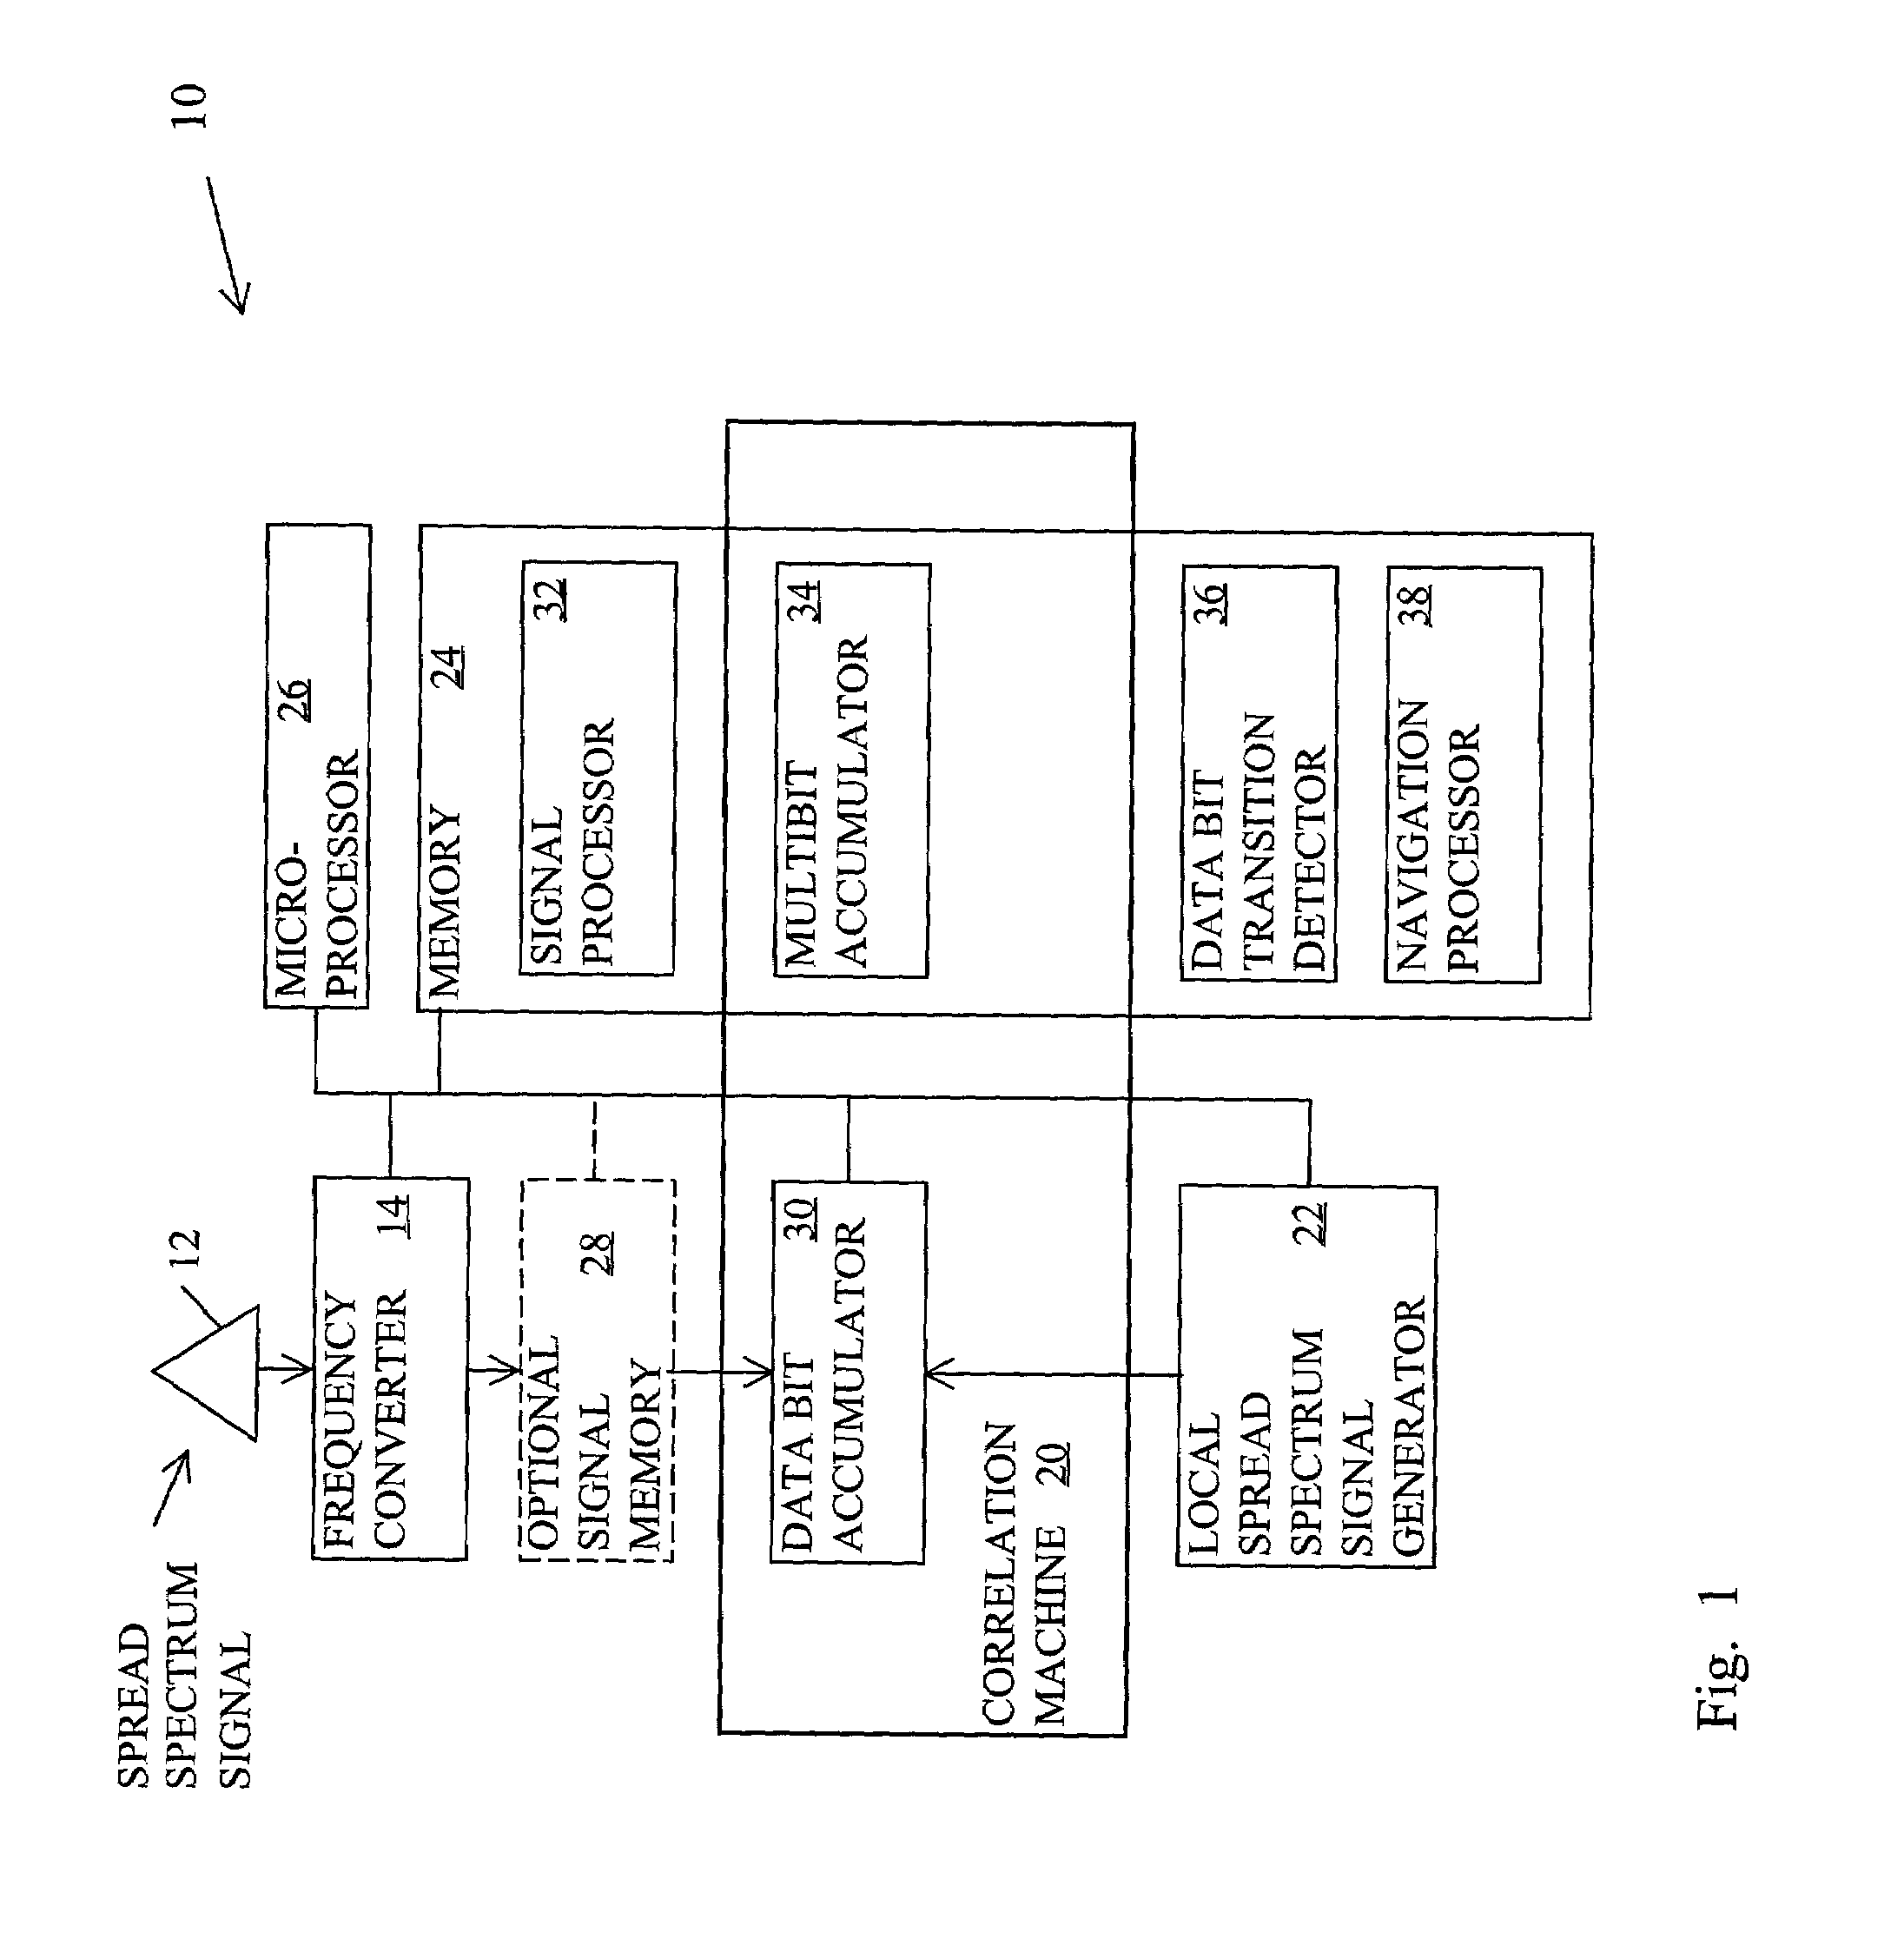 Method for determining data bit transitions for a low level spread spectrum signal